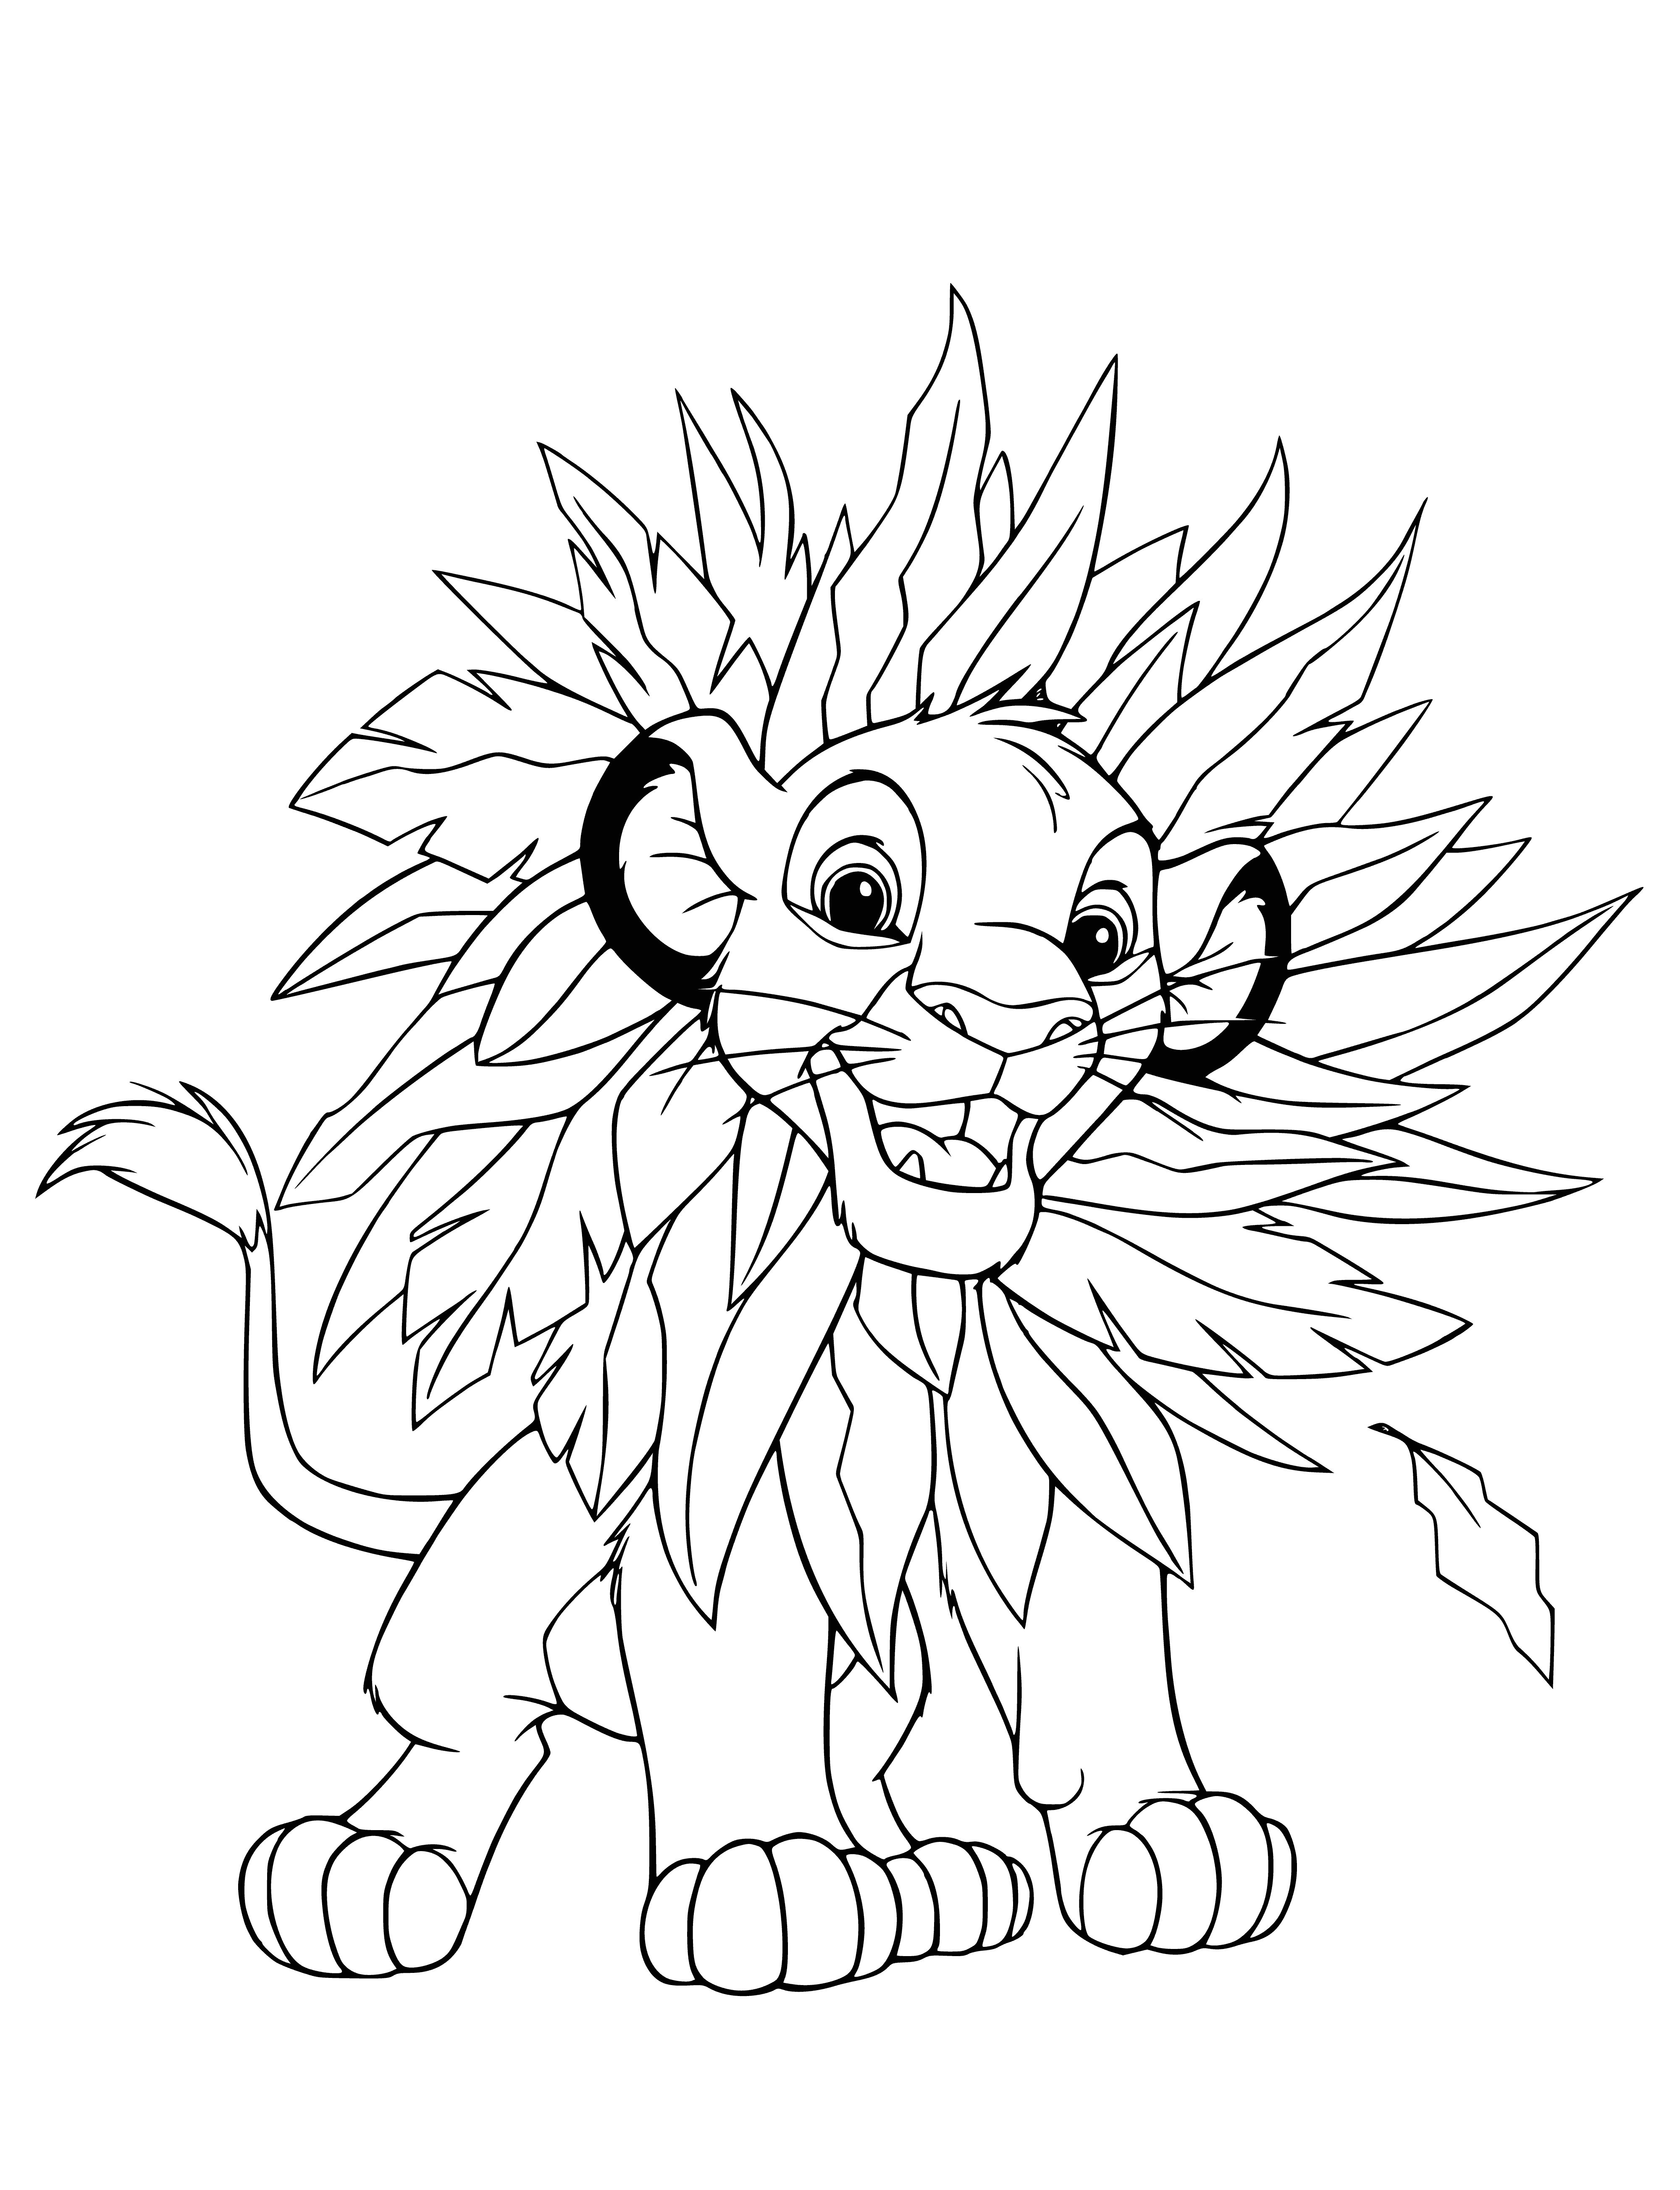 coloring page: Lion cub plays with a big, bouncy ball; its mother, big and strong, watches nearby with her flowing mane.